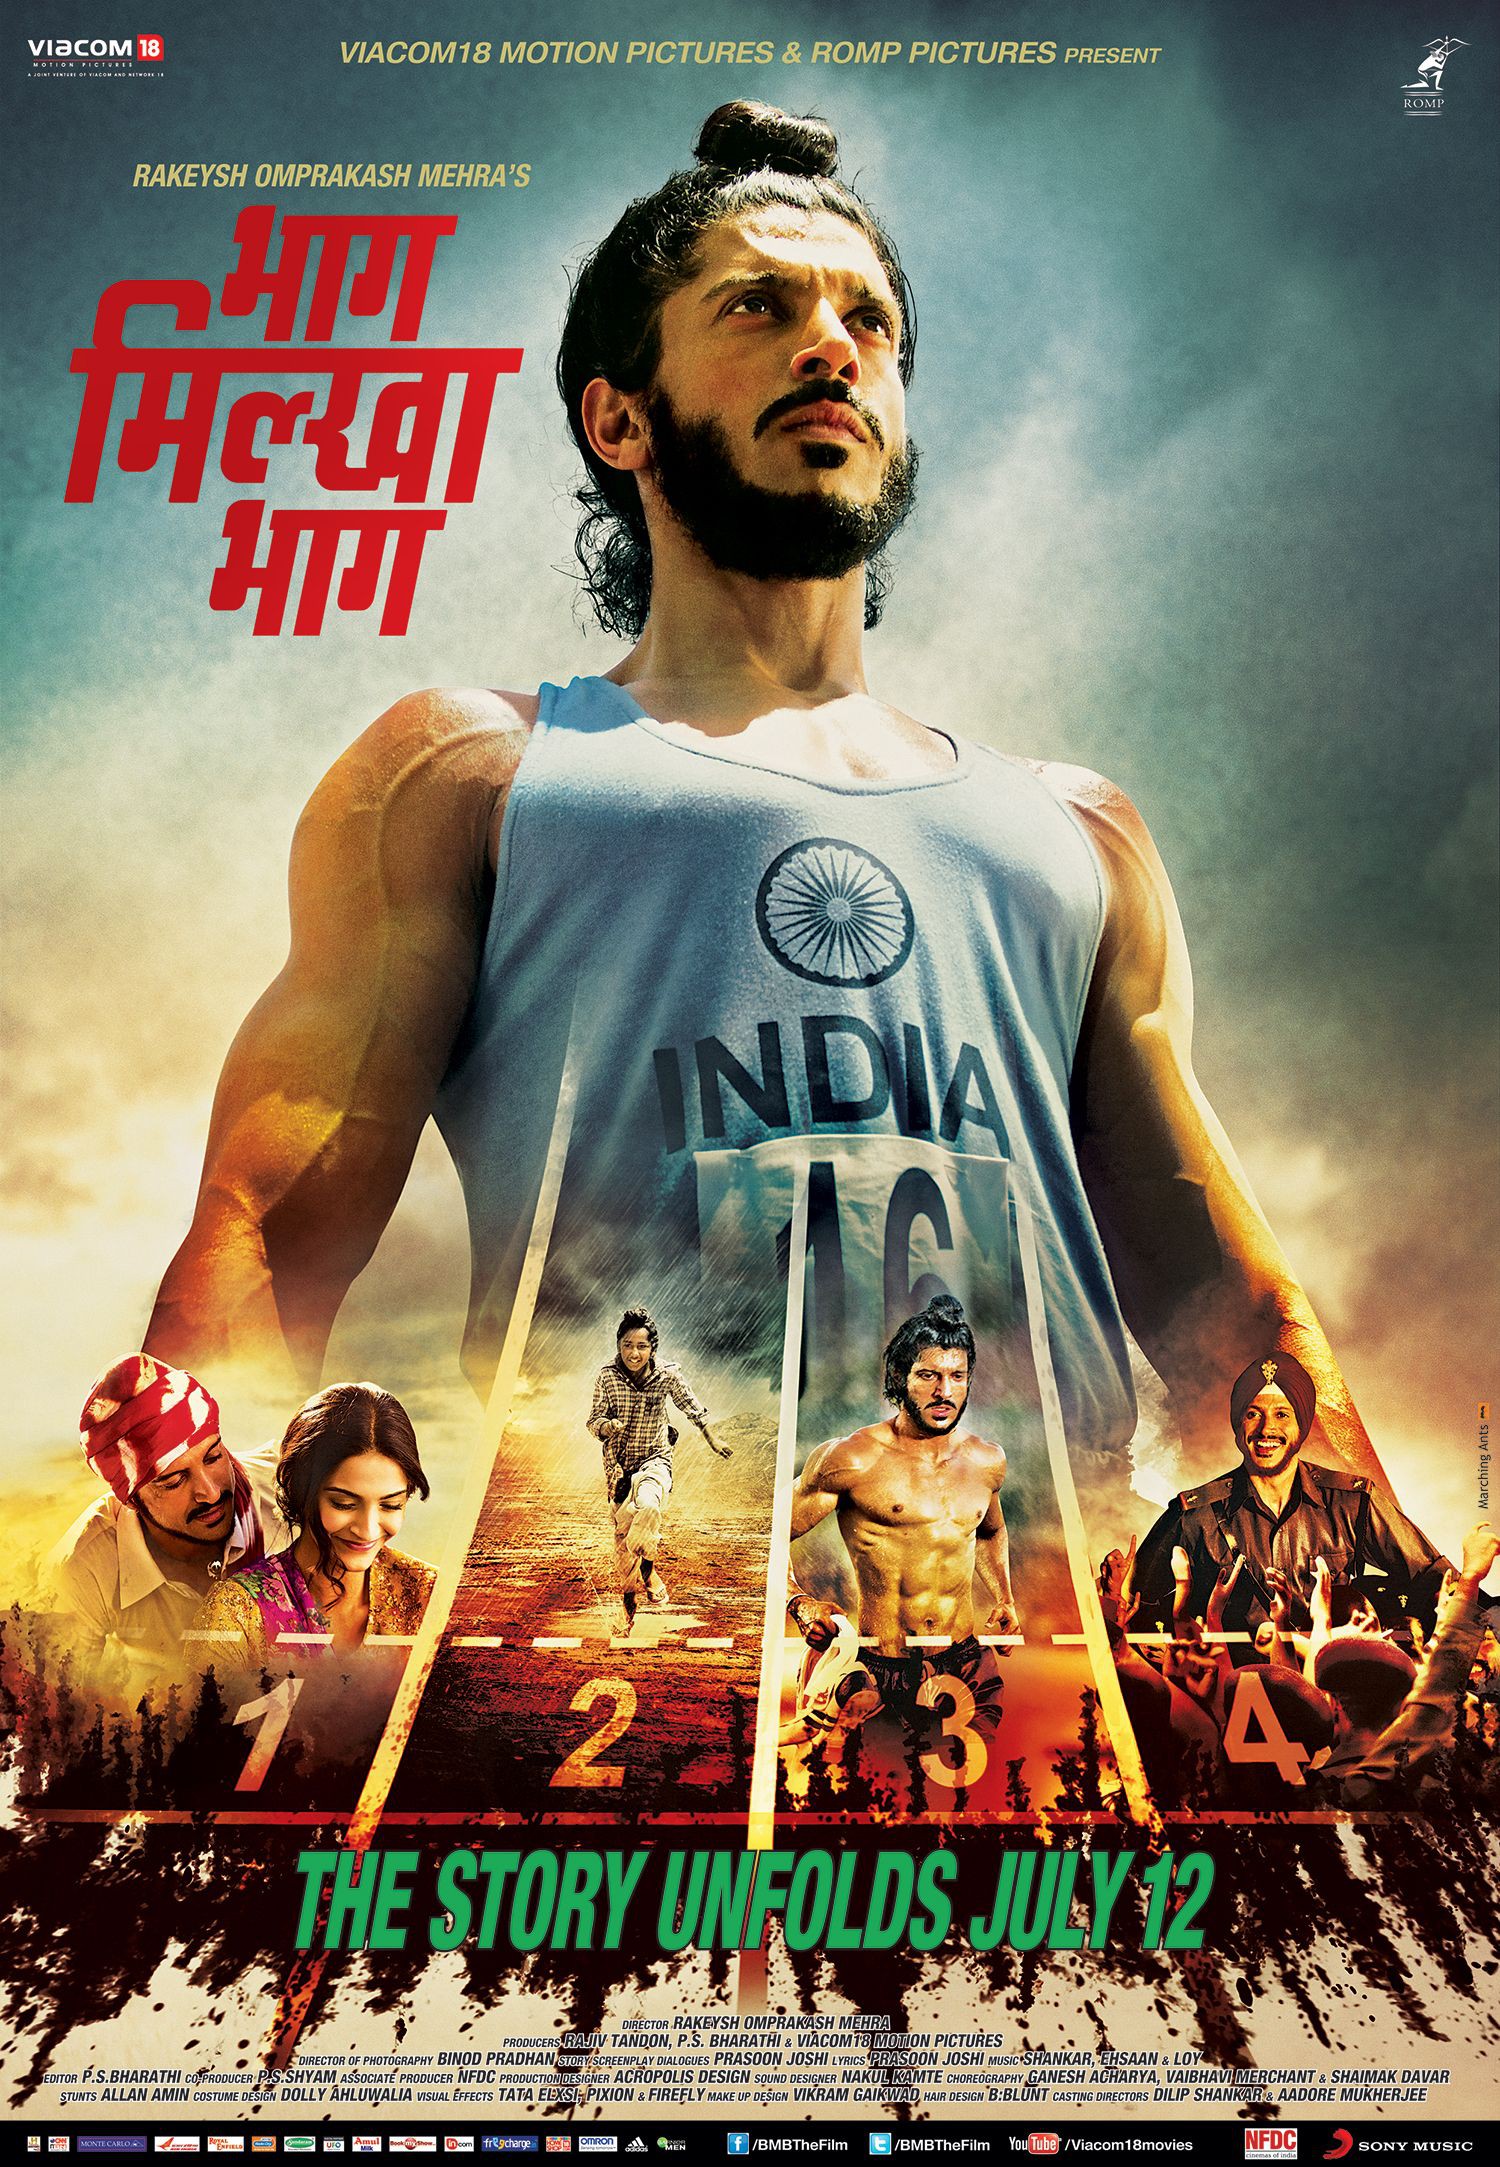 Mega Sized Movie Poster Image for Bhaag Milkha Bhaag (#6 of 7)